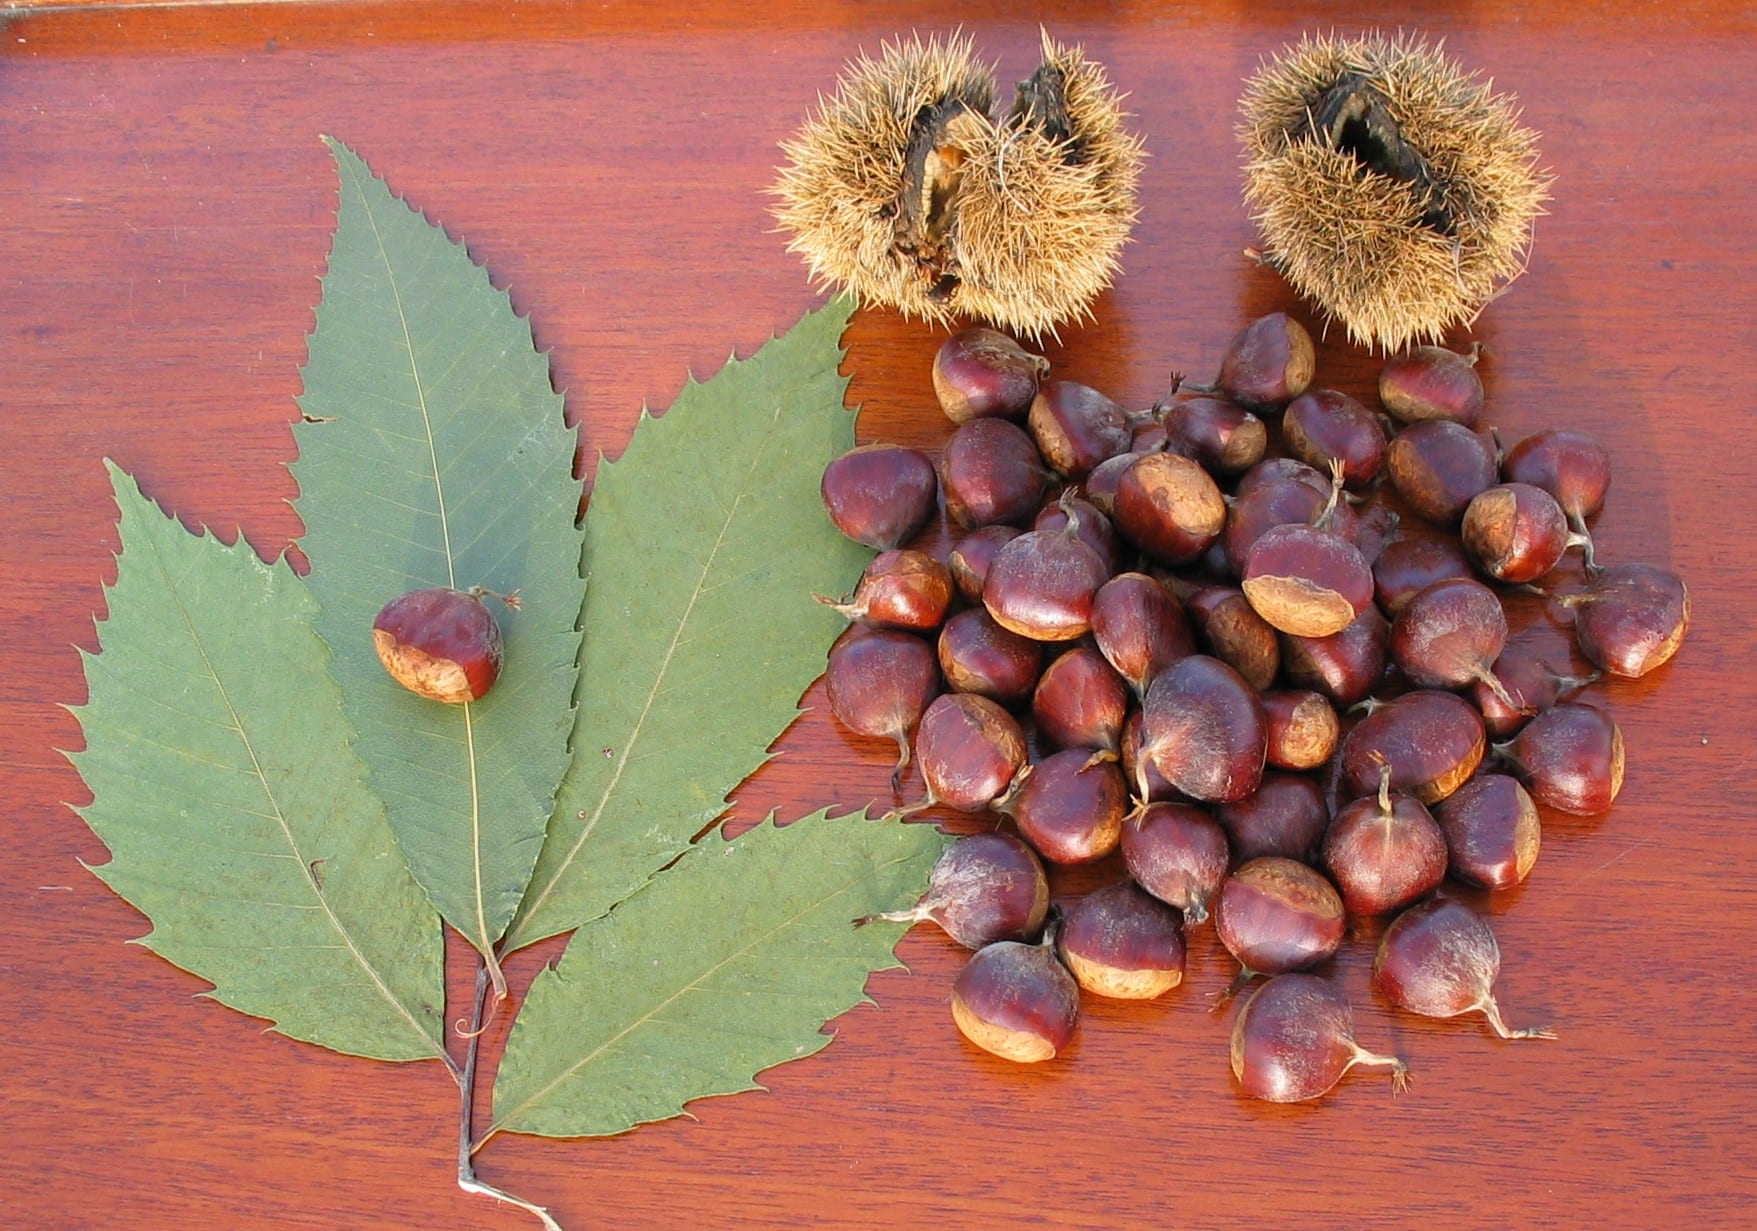 American chestnut leaves and nuts [Wikipedia commons]